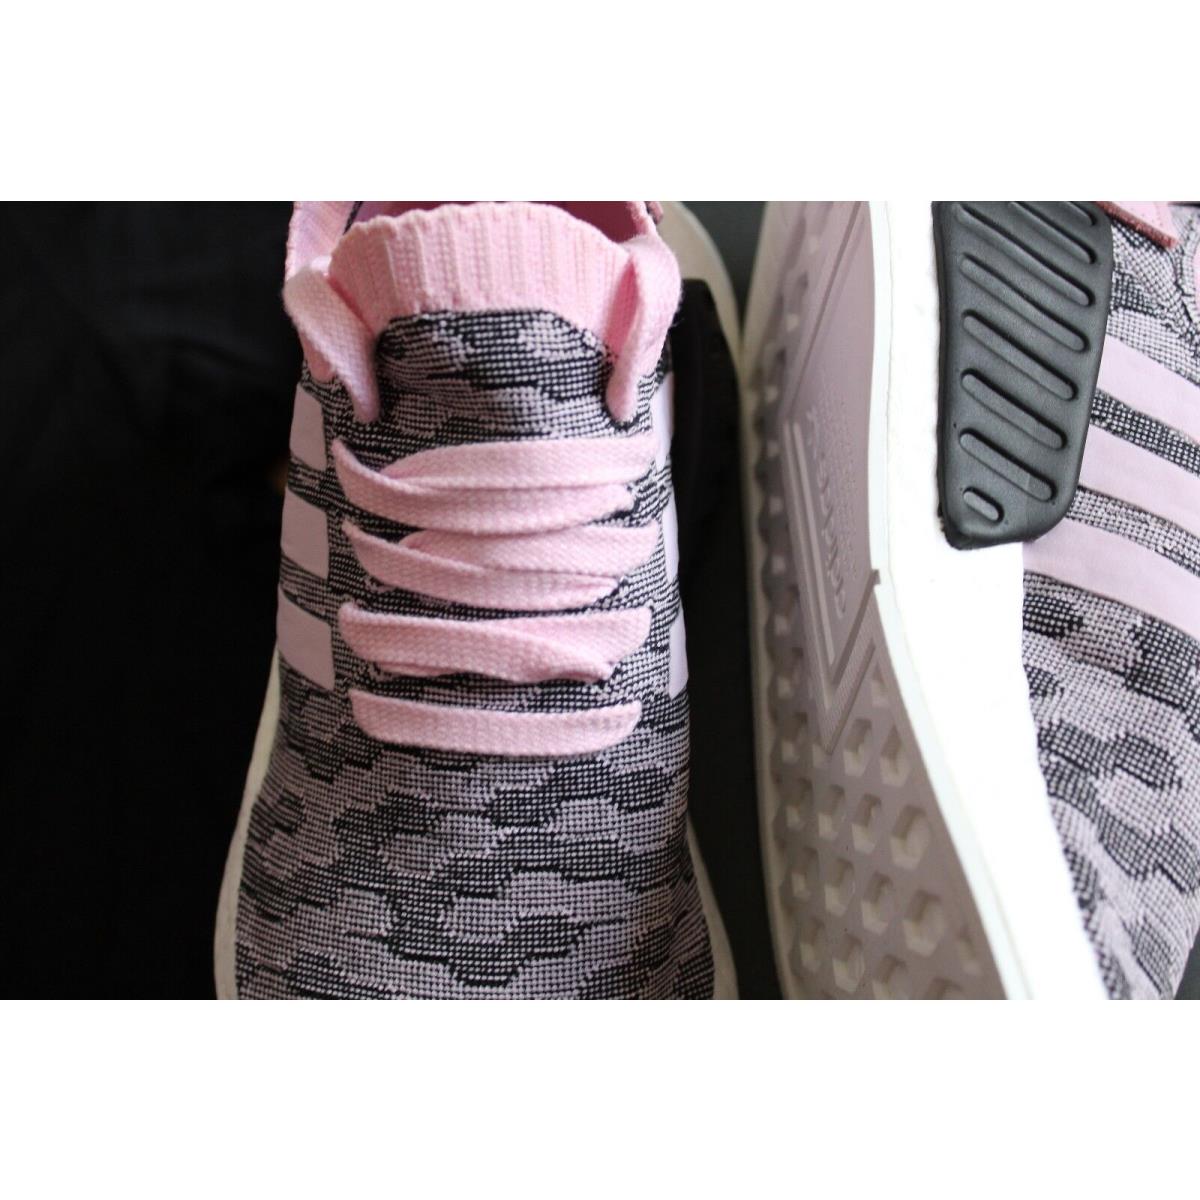 Adidas shoes NMD - PINK 1